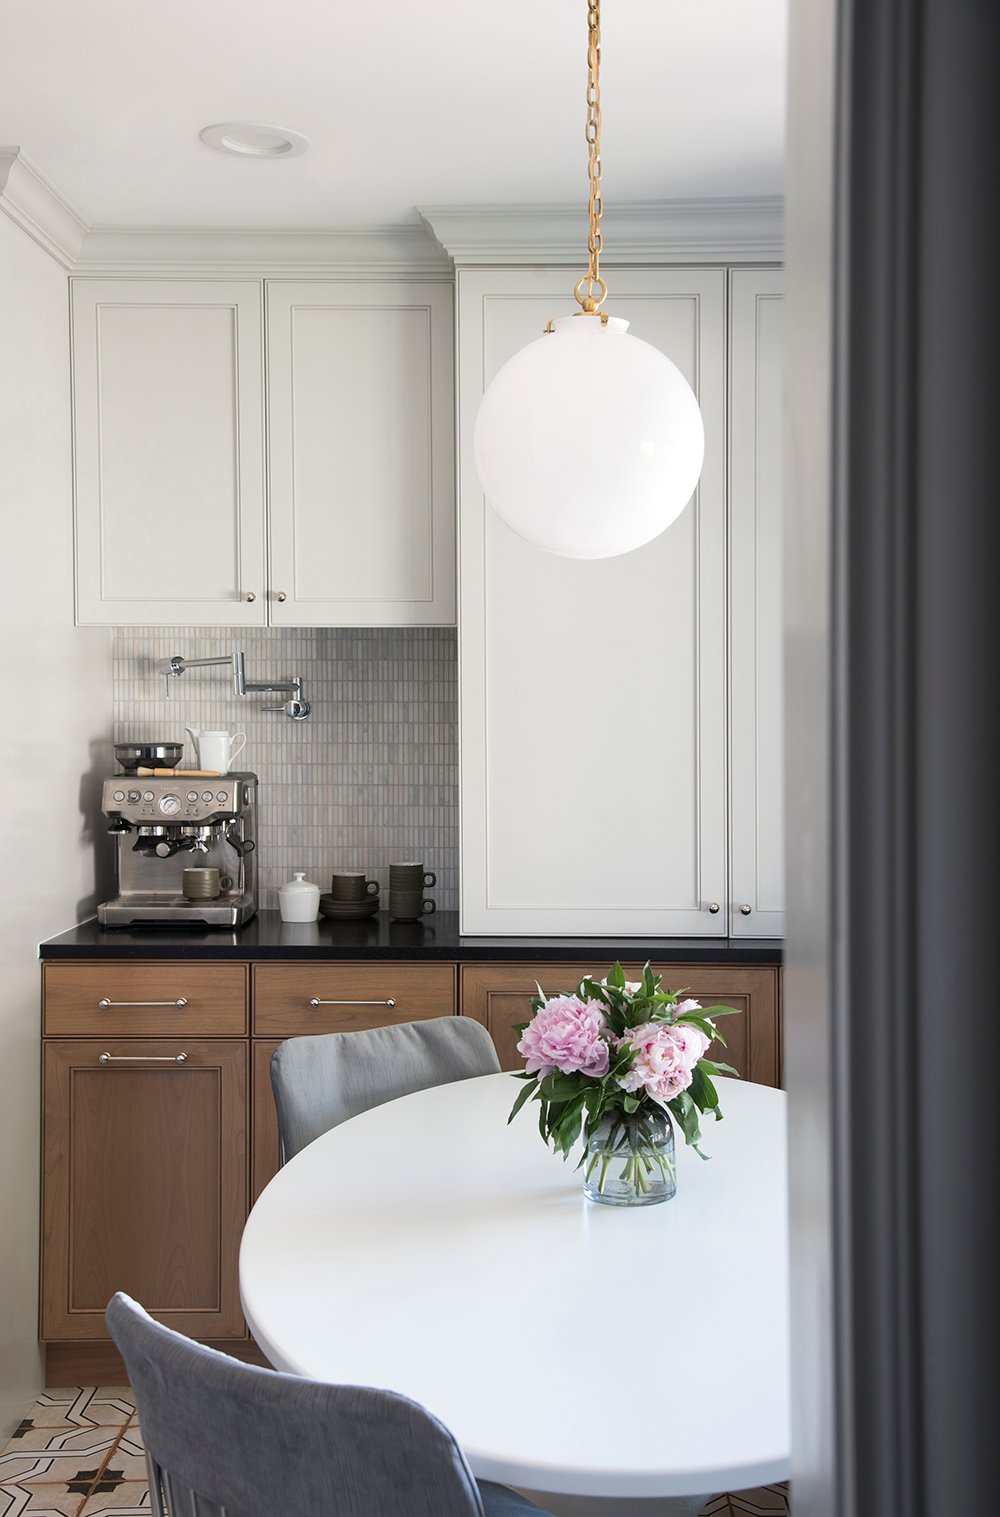 5 Things Every Kitchen Needs - Room for Tuesday